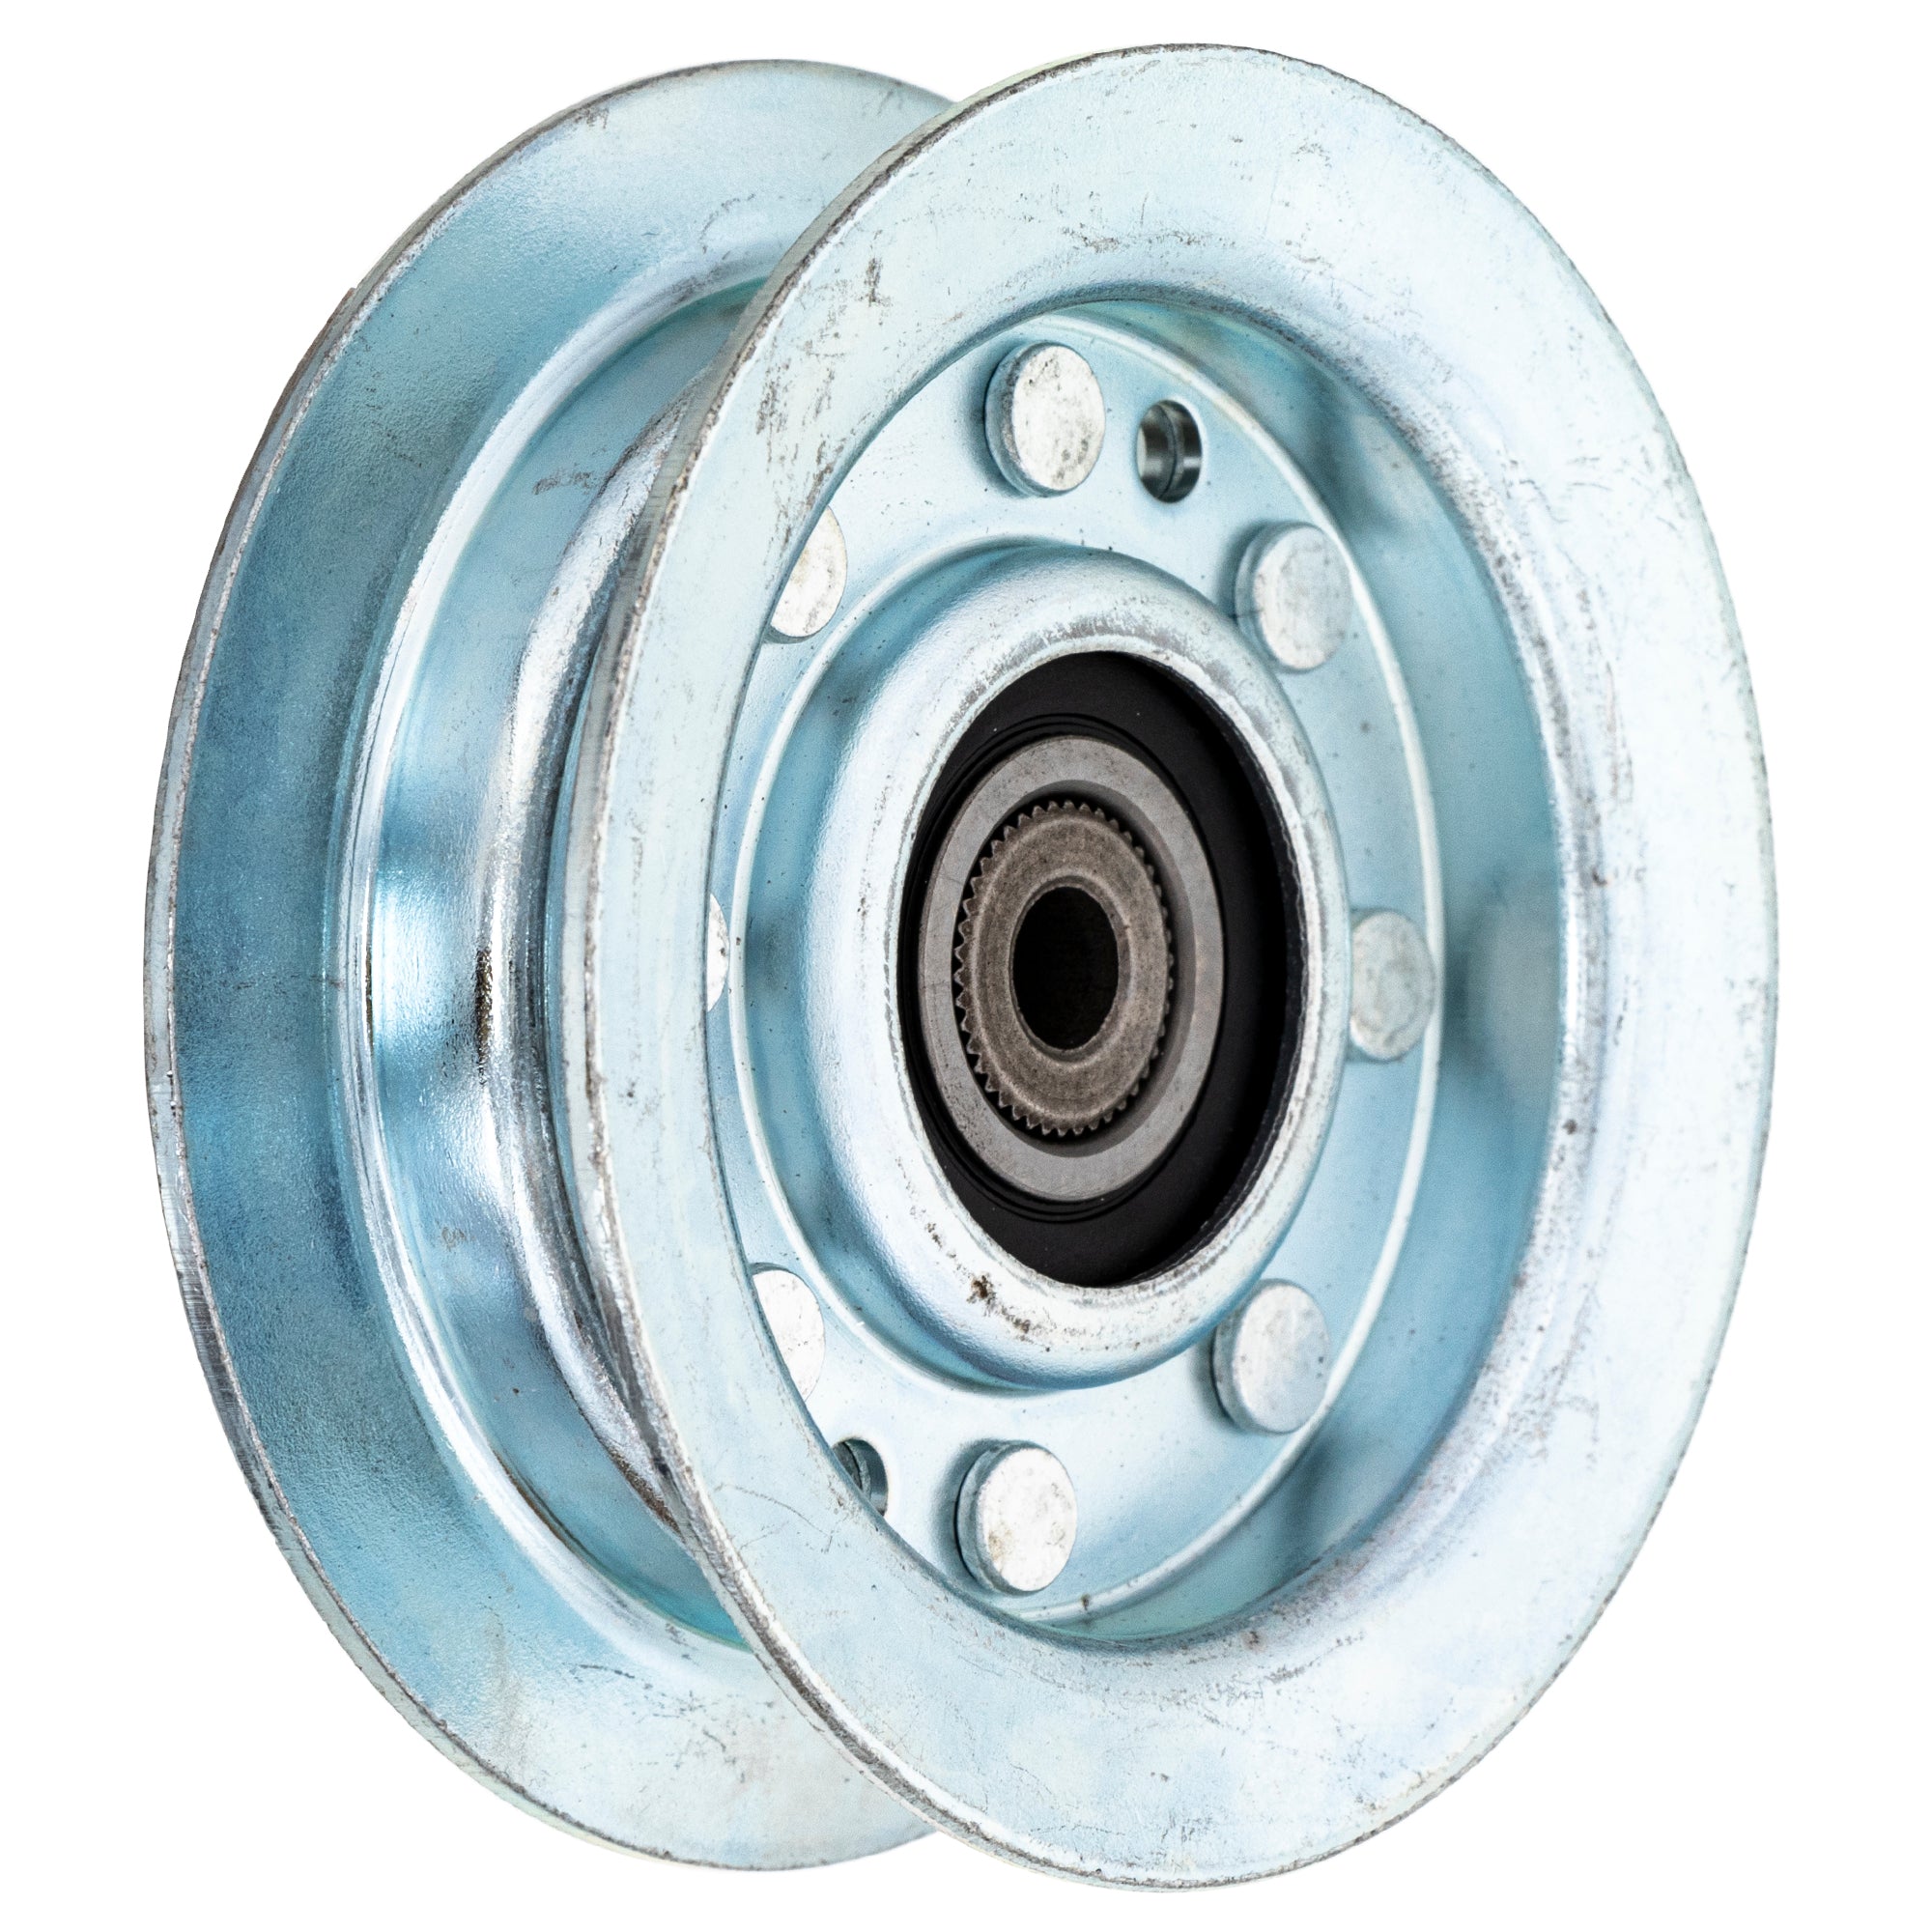 Idler Pulley For John Deere Sabre Scotts AM146880 GY00054 AUC17921